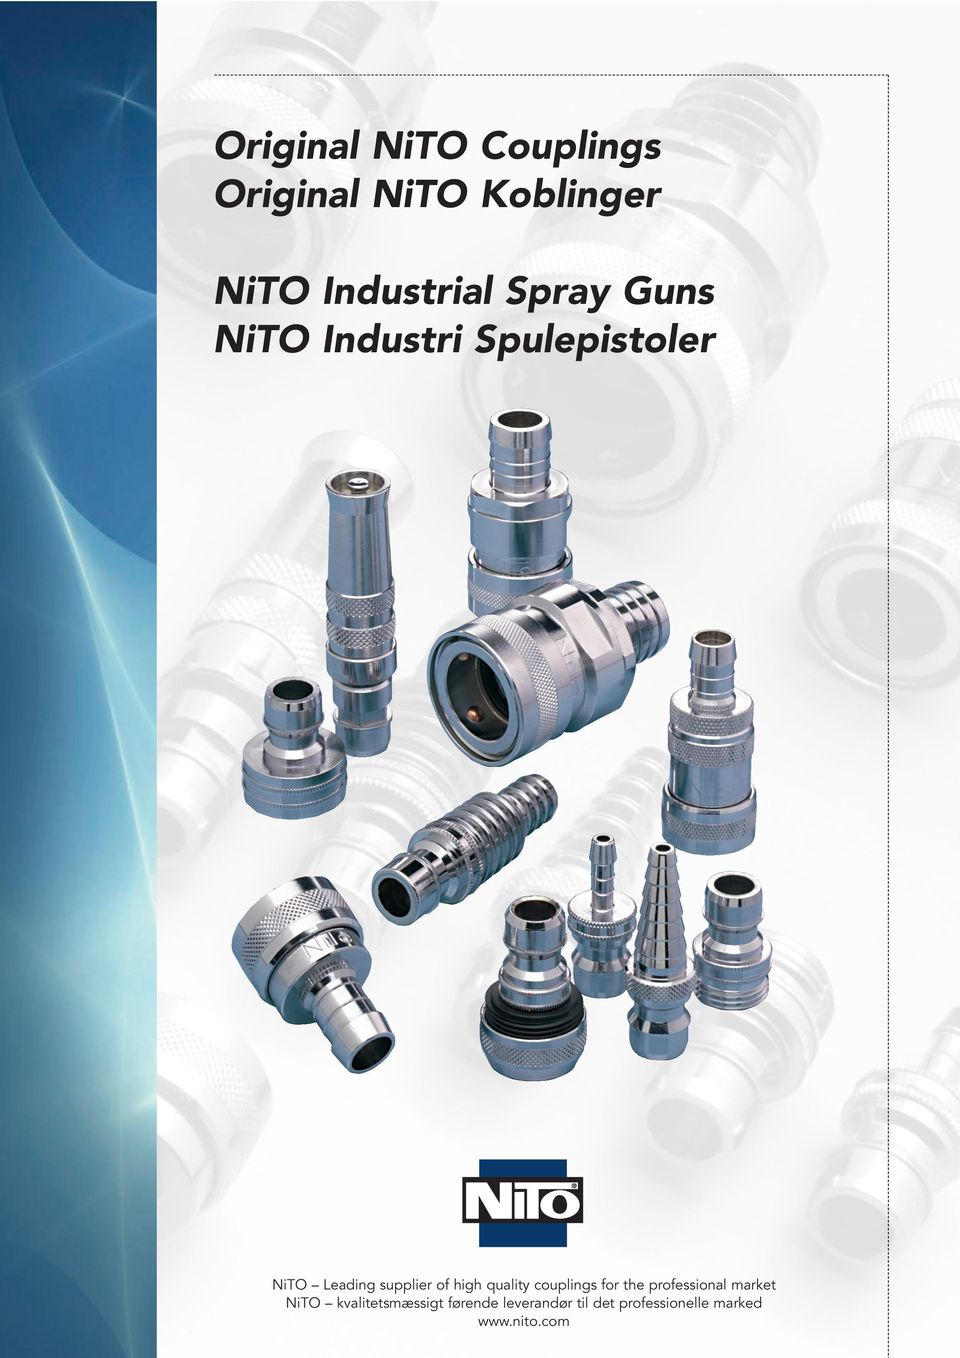 high quality couplings for the professional market NiTO